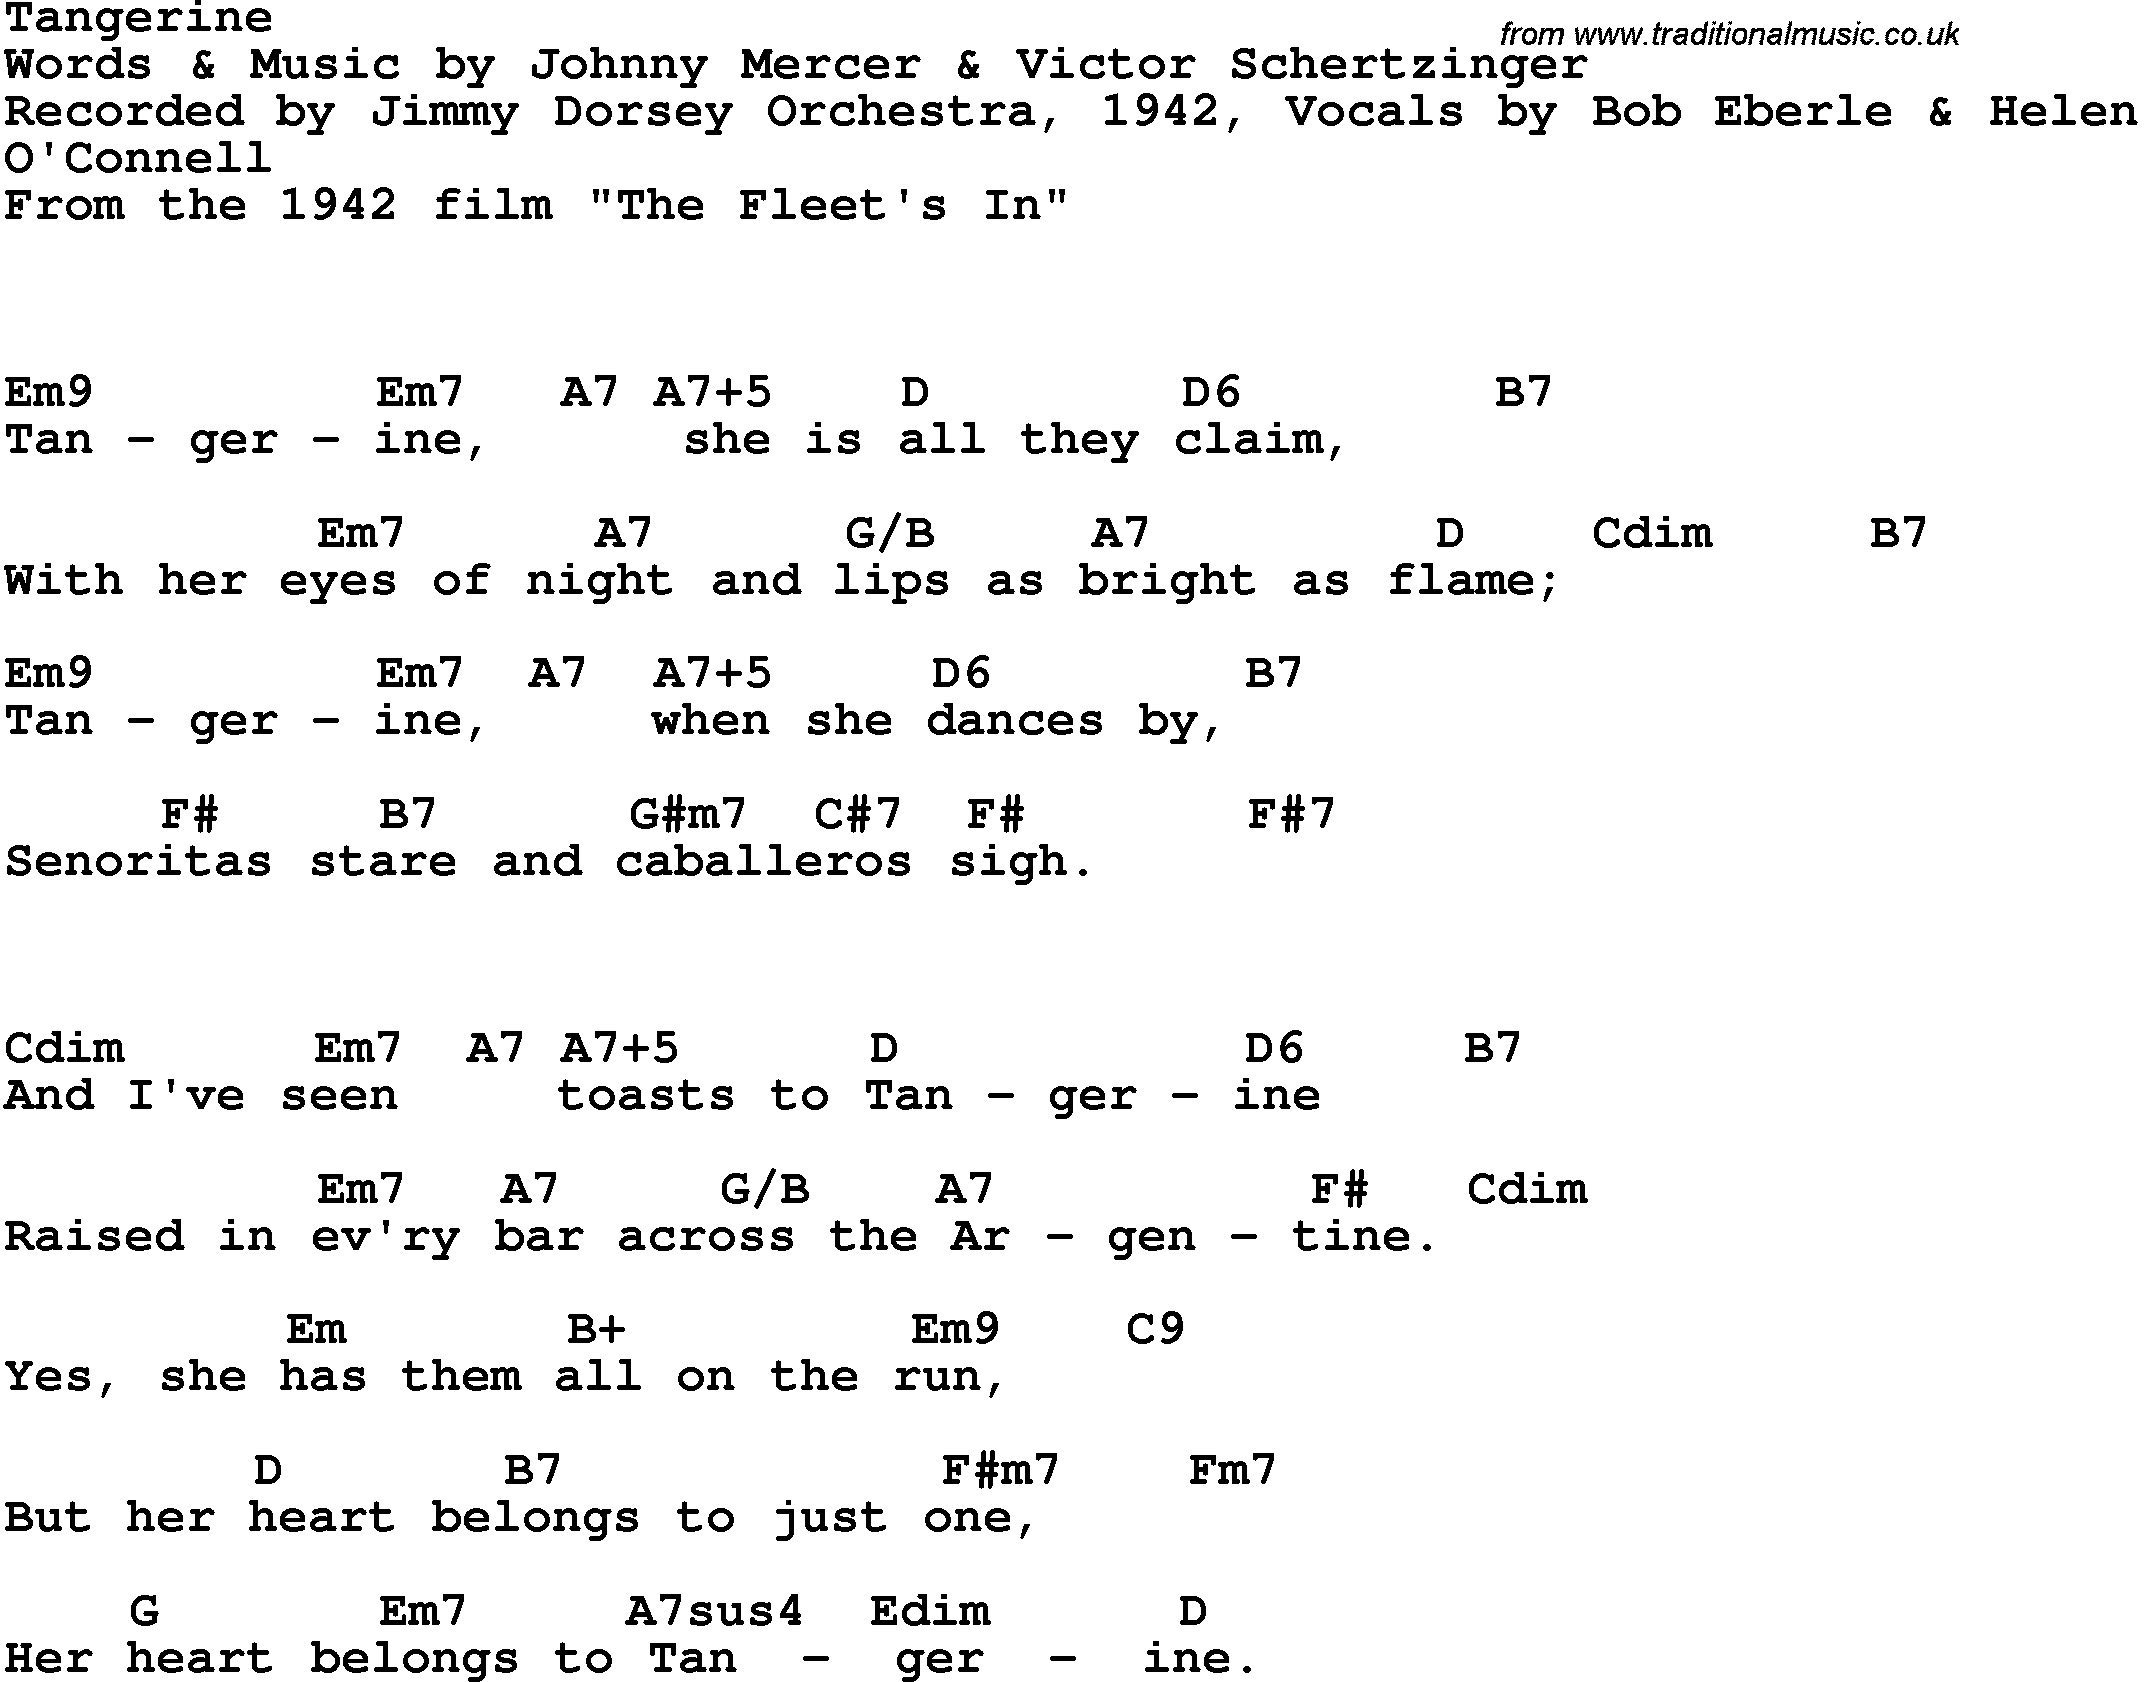 Song Lyrics with guitar chords for Tangerine - Jimmy Dorsey, 1942